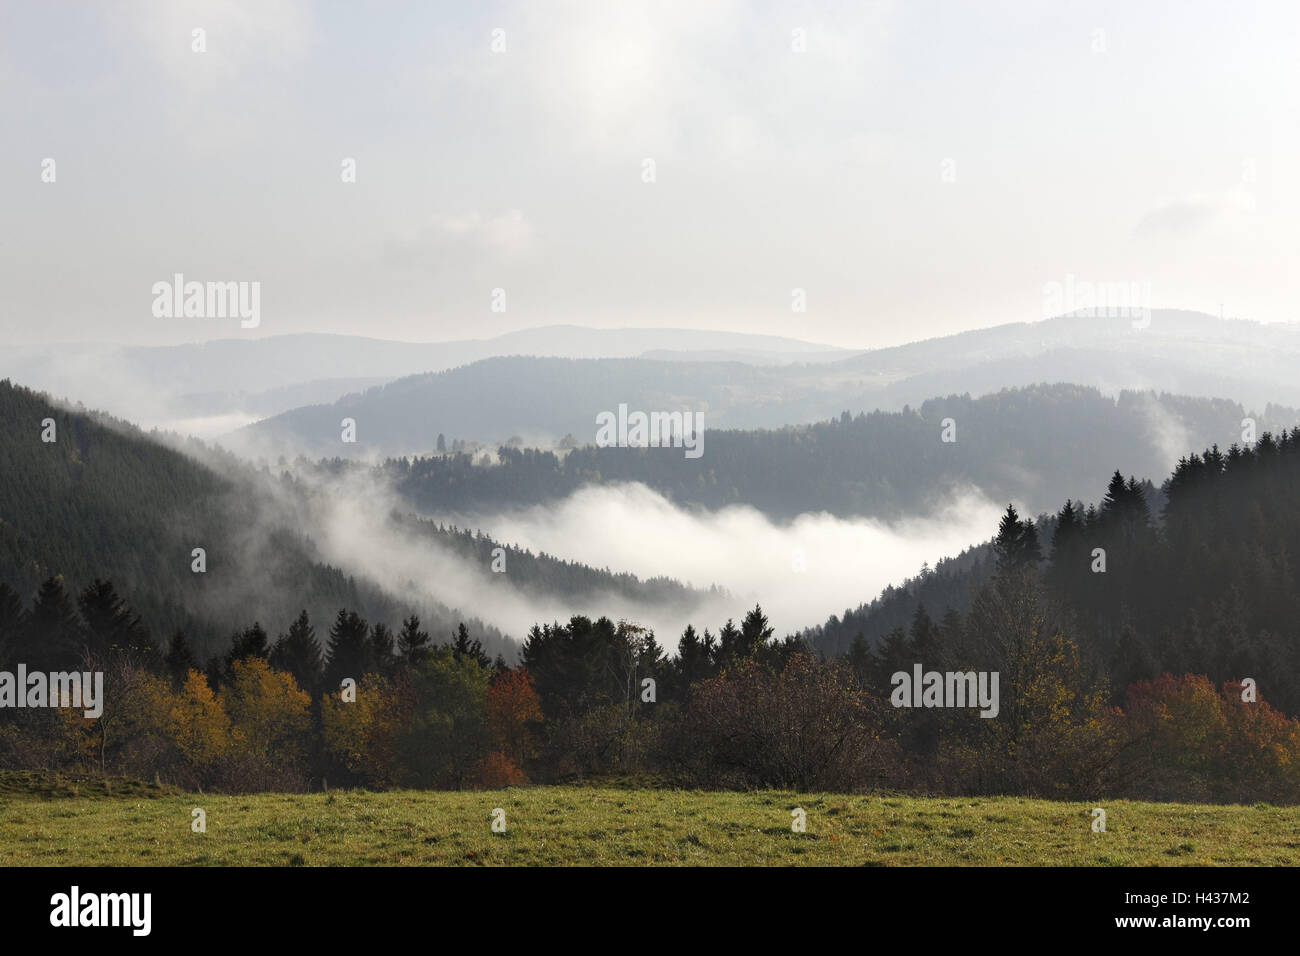 Germany, Thuringia, Schwarzatal, view, fog, clouds, place of interest, destination, tourism, scenery, hill, wood, trees, season, autumn, deserted, Schiefergebirge, Stock Photo